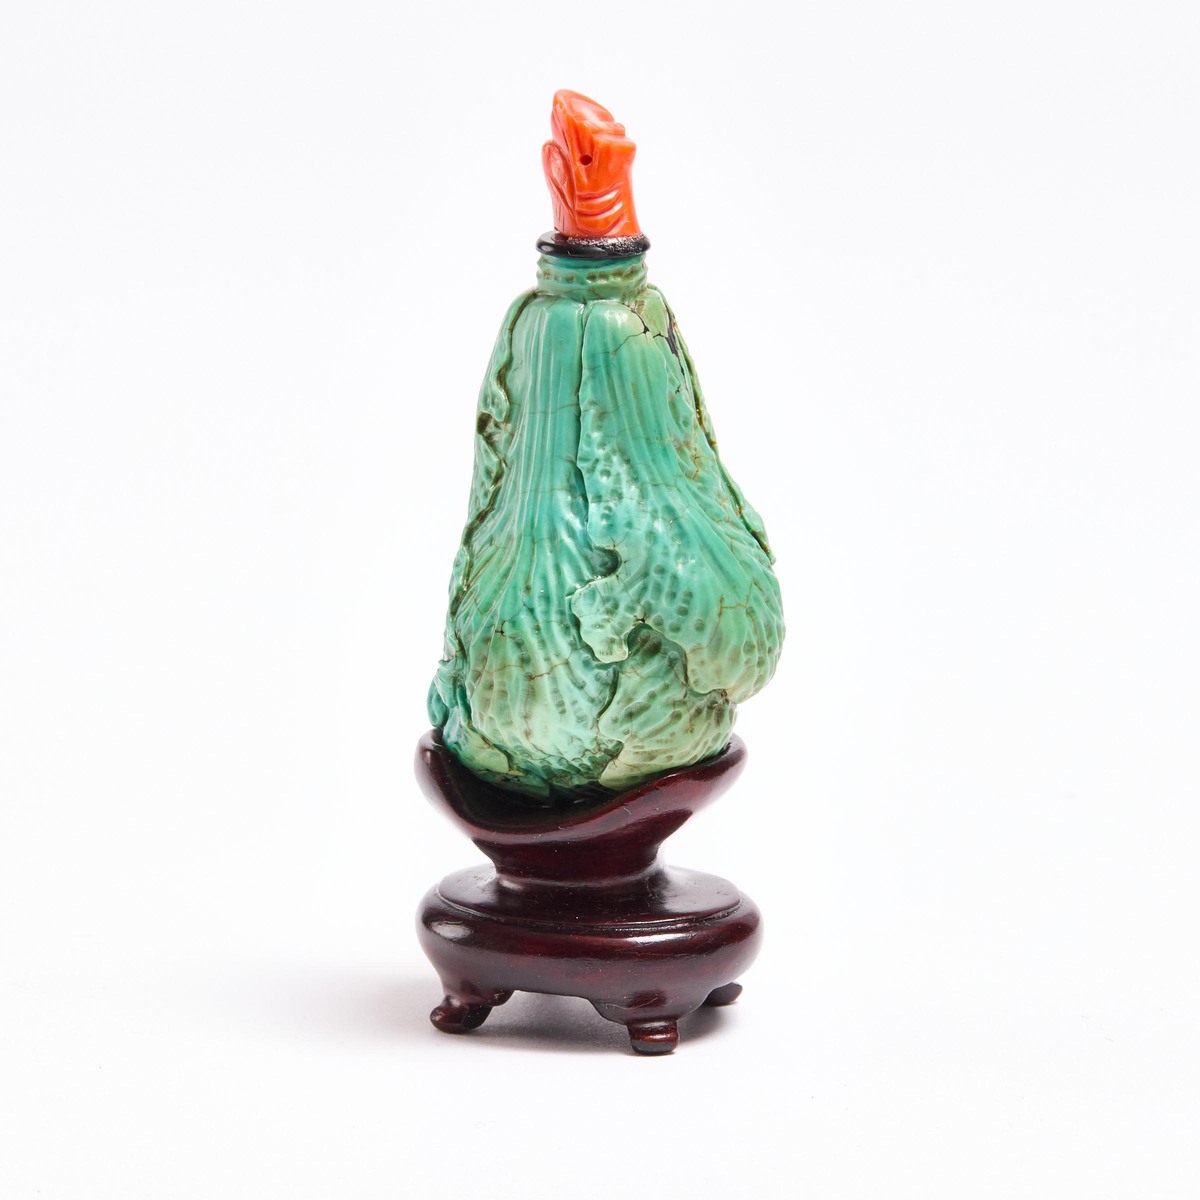 A Carved Turquoise Cabbage-Form Snuff Bottle, 19th Century, 清 十九世纪 绿松石雕白菜型烟壶, length 3.1 in — 7.8 cm - Image 3 of 5